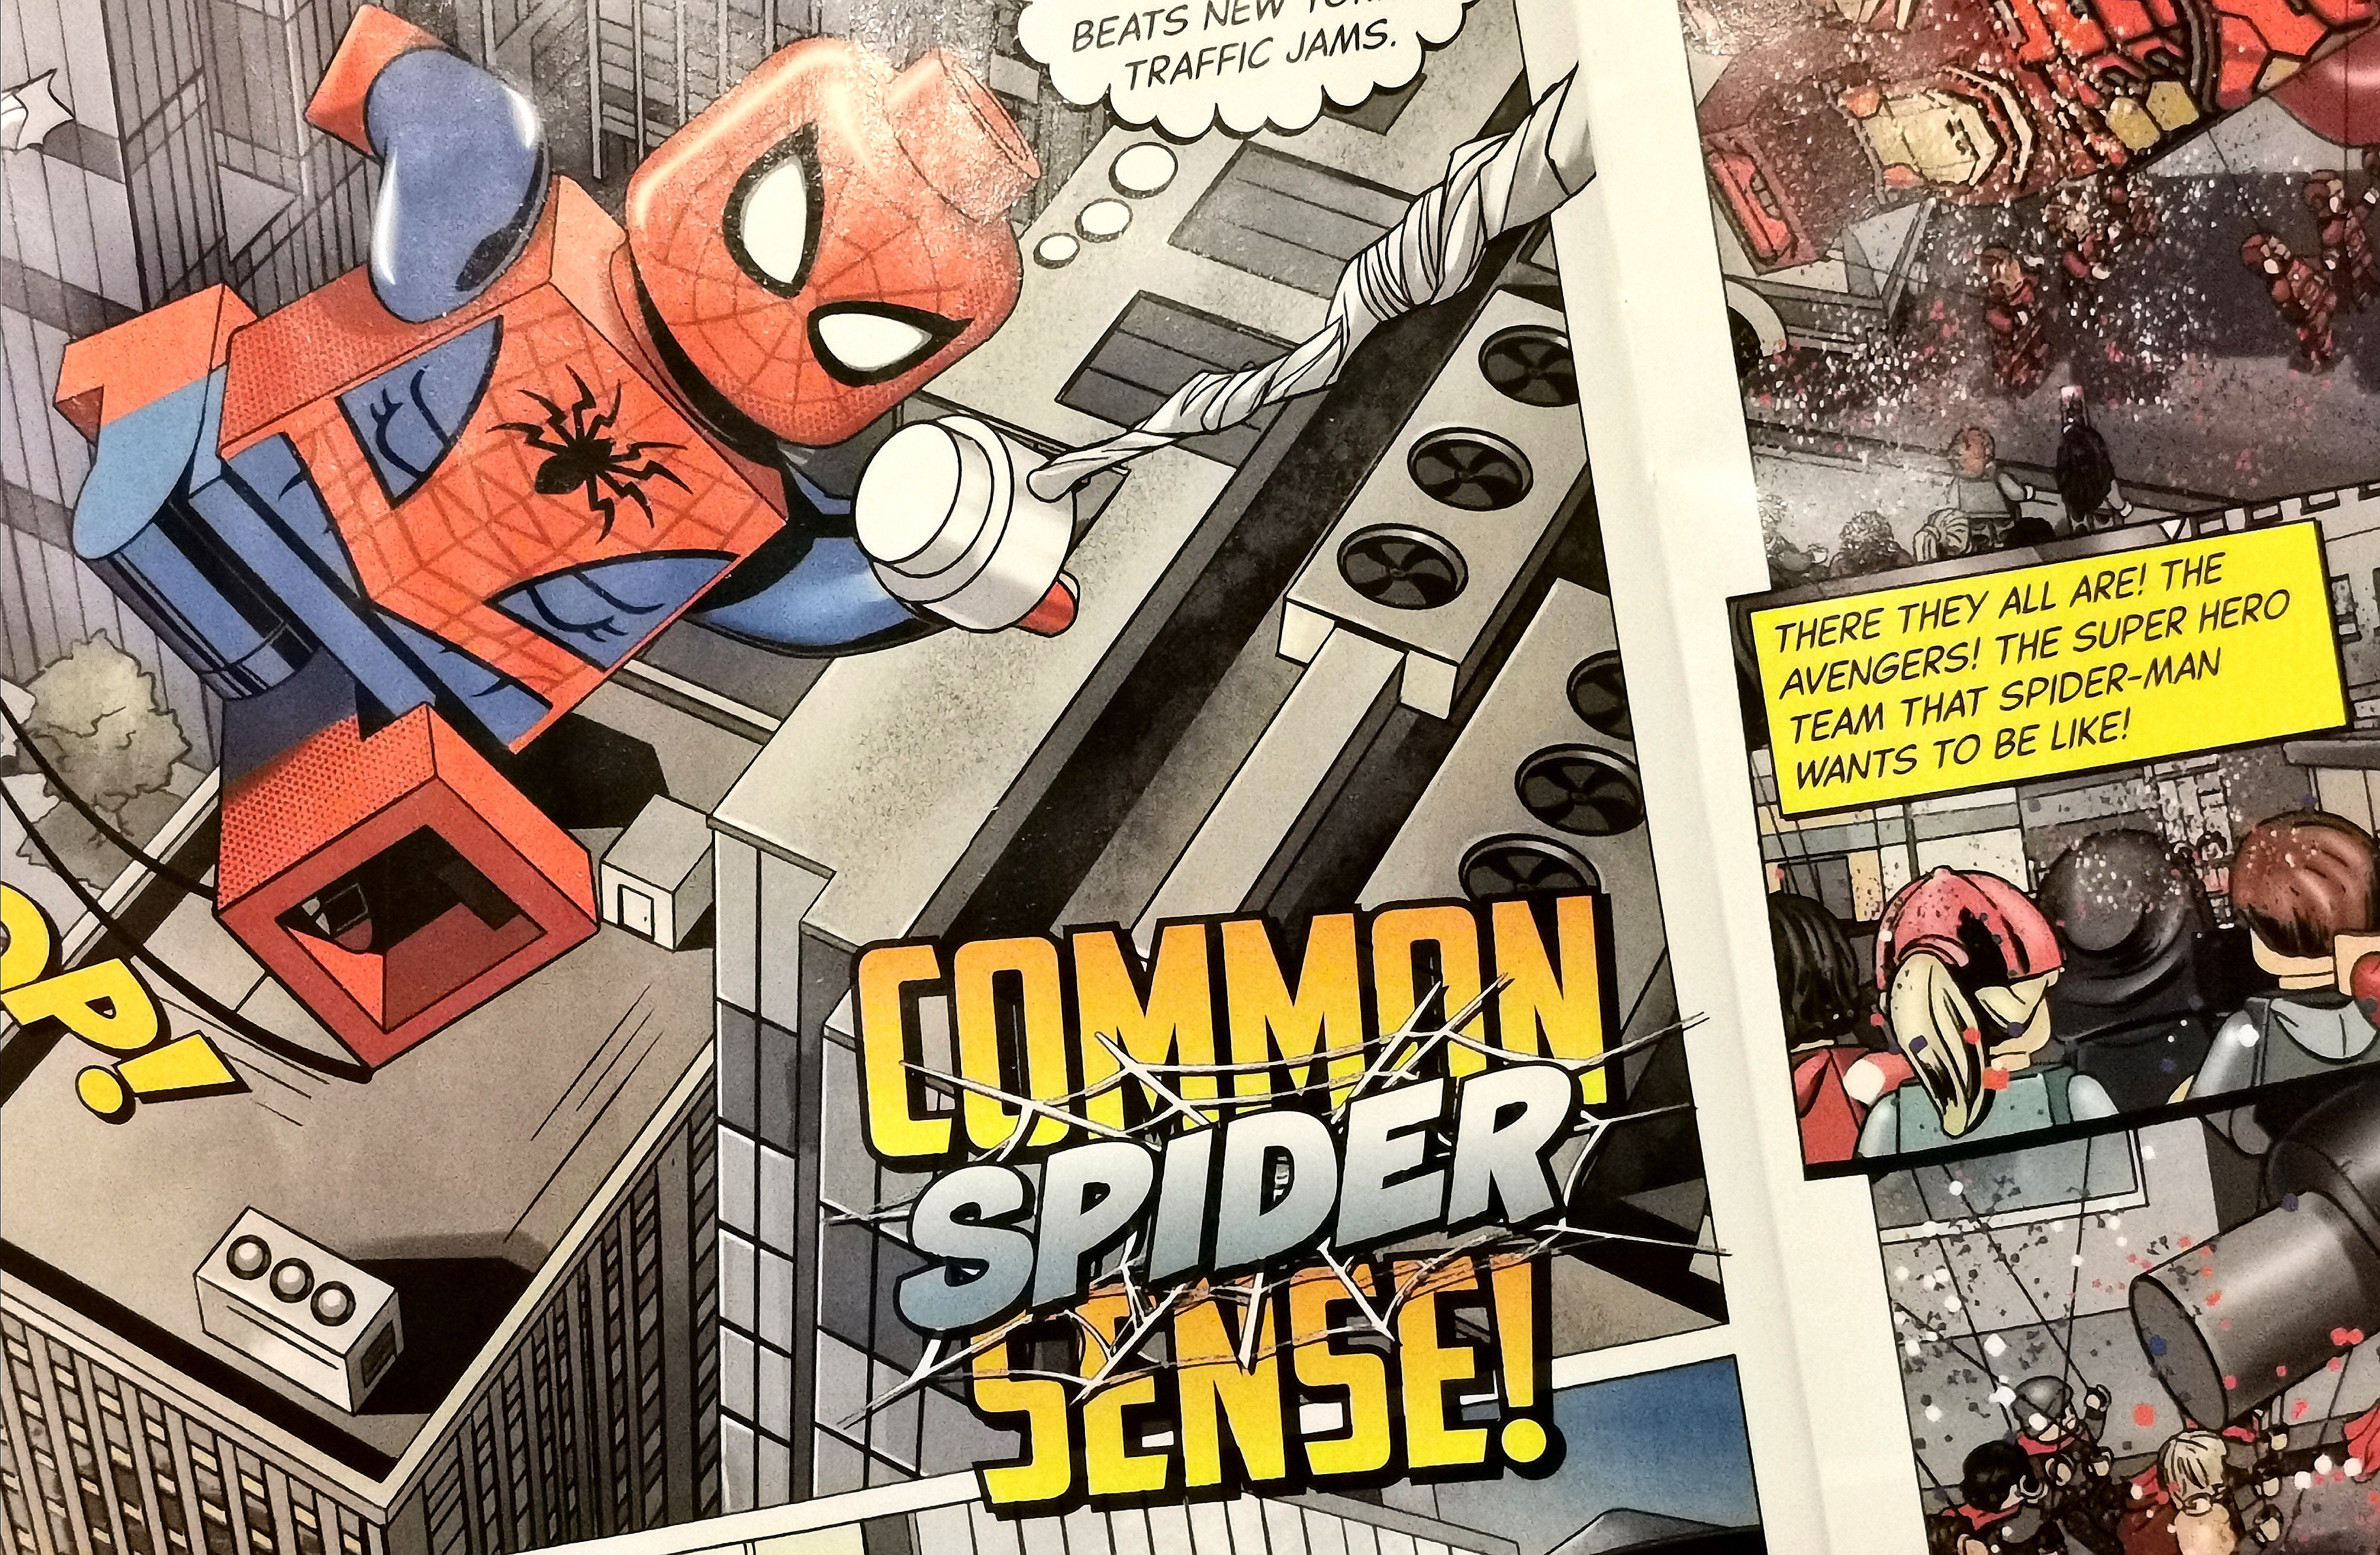 LEGO Avengers Magazine Issue 1 Out Now! | The Brick Post